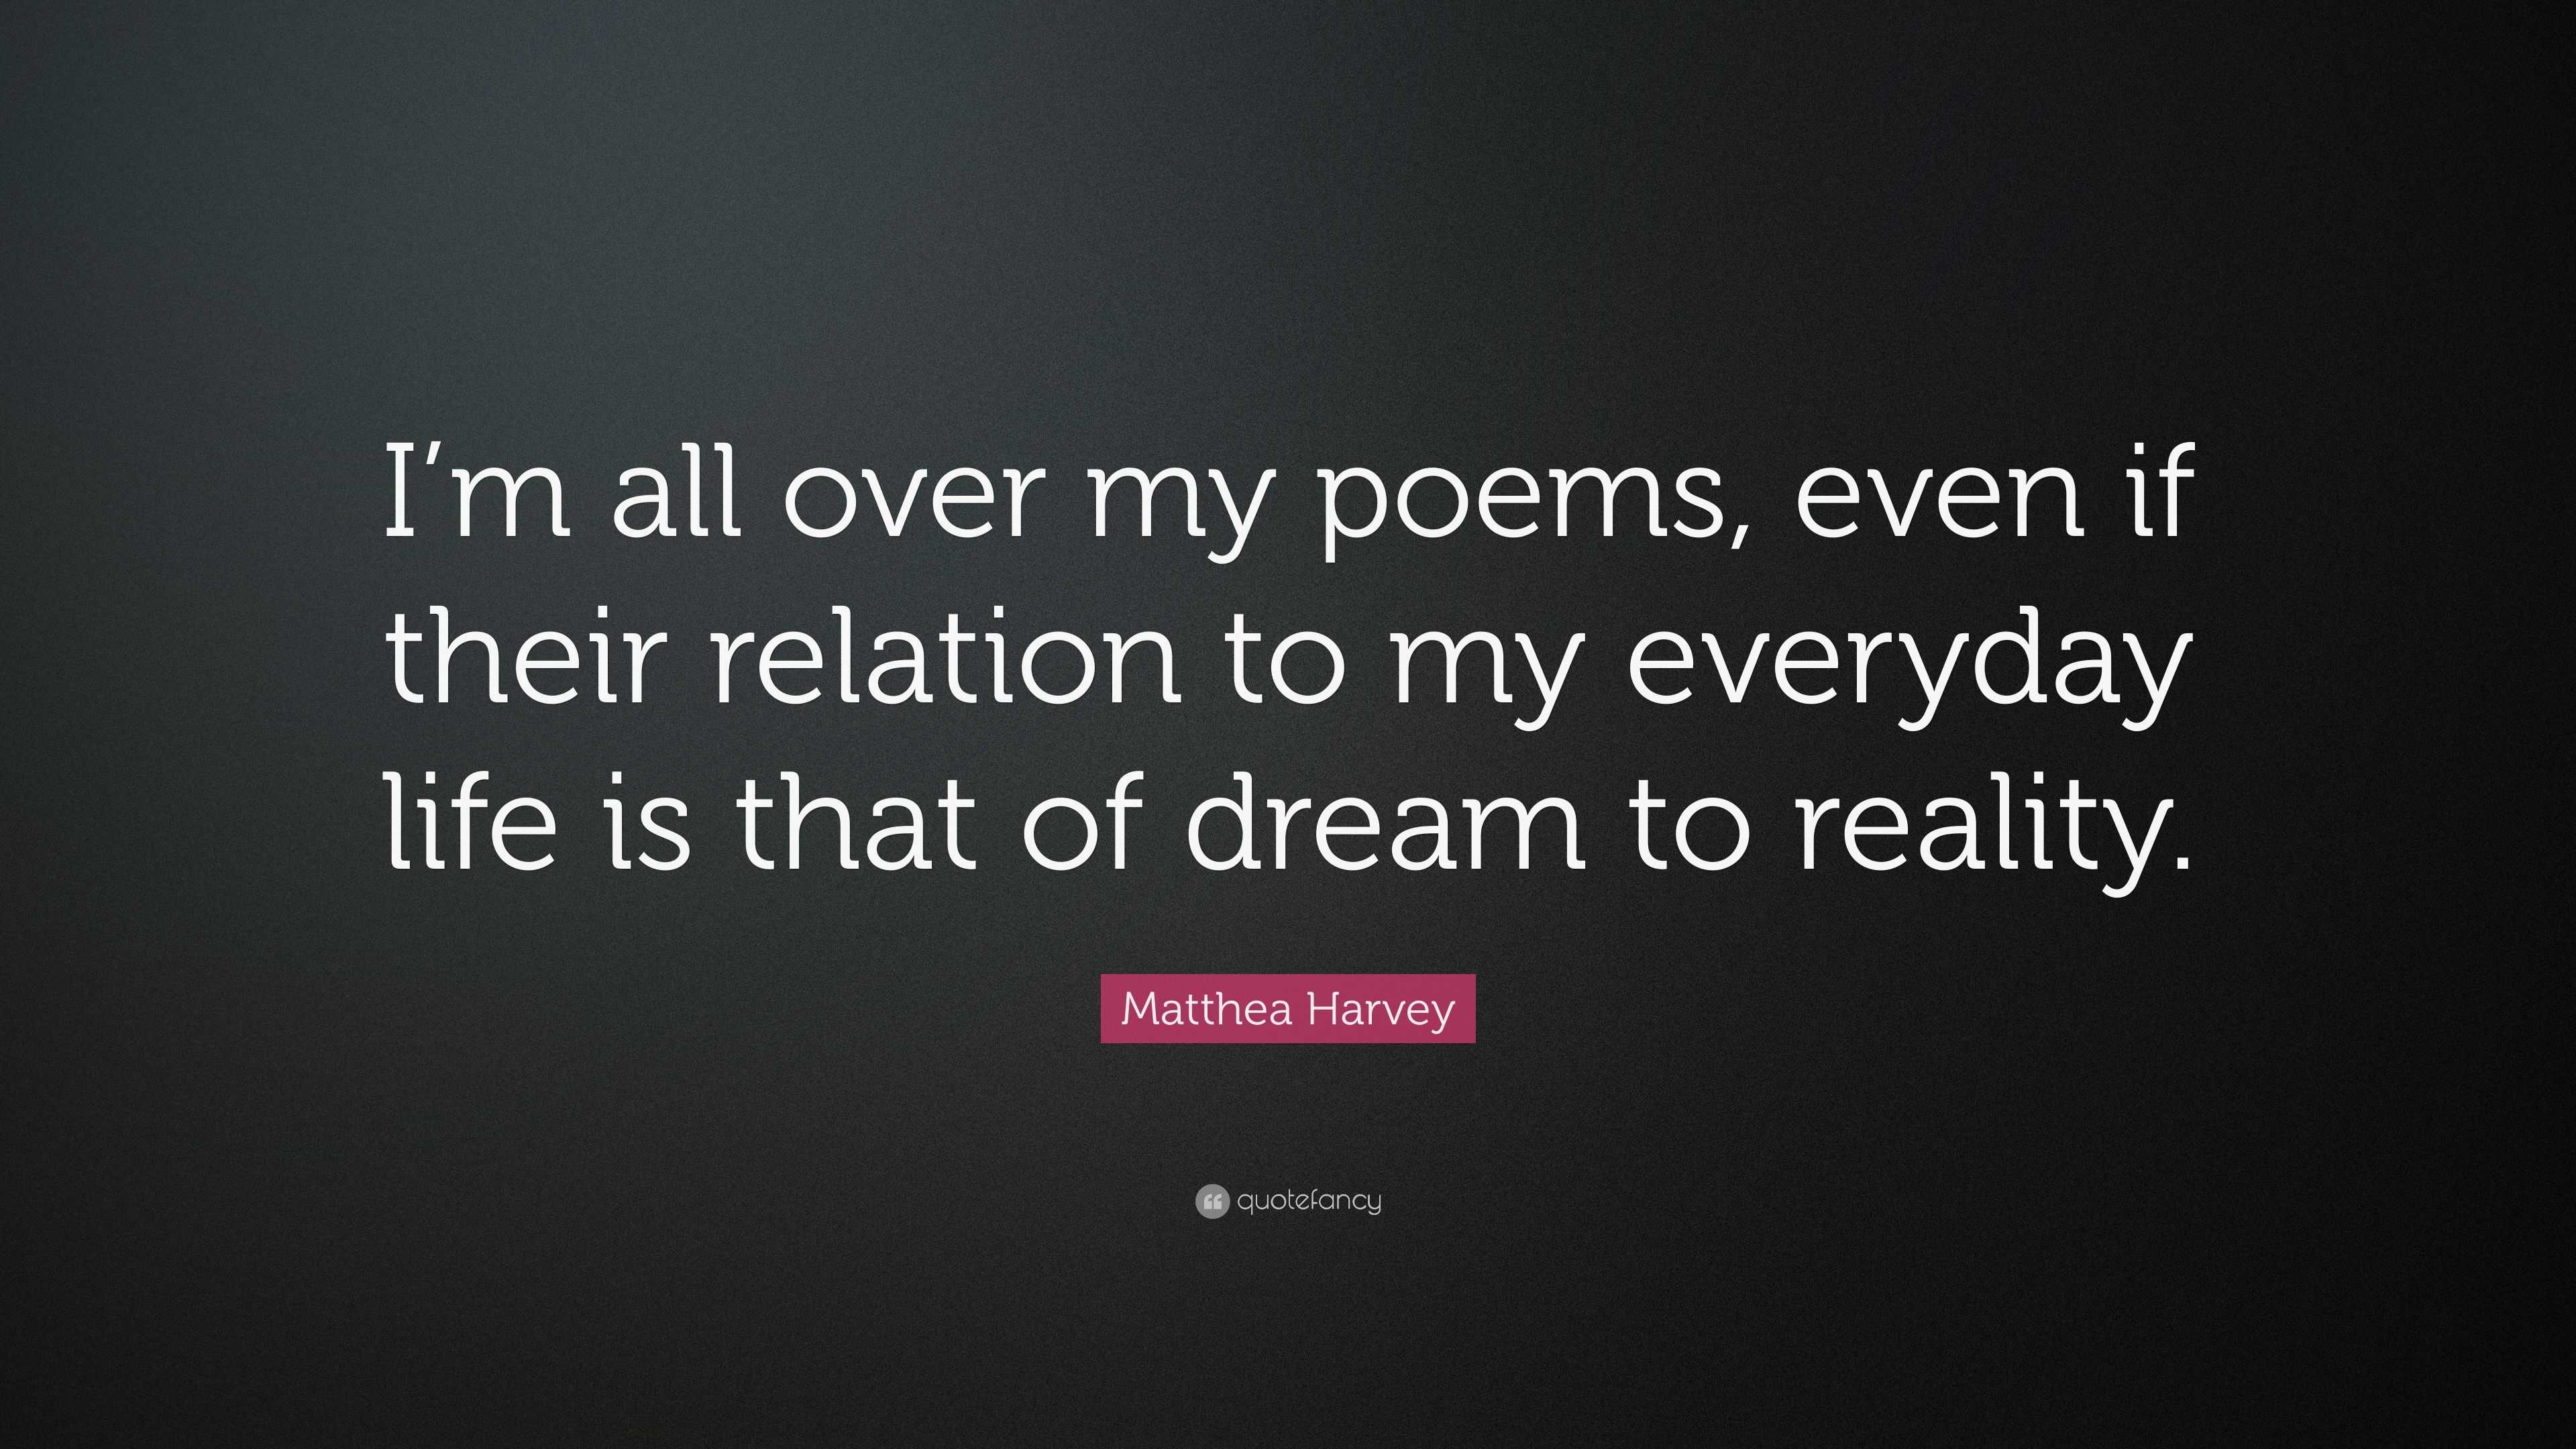 Matthea Harvey Quote: “I’m all over my poems, even if their relation to ...